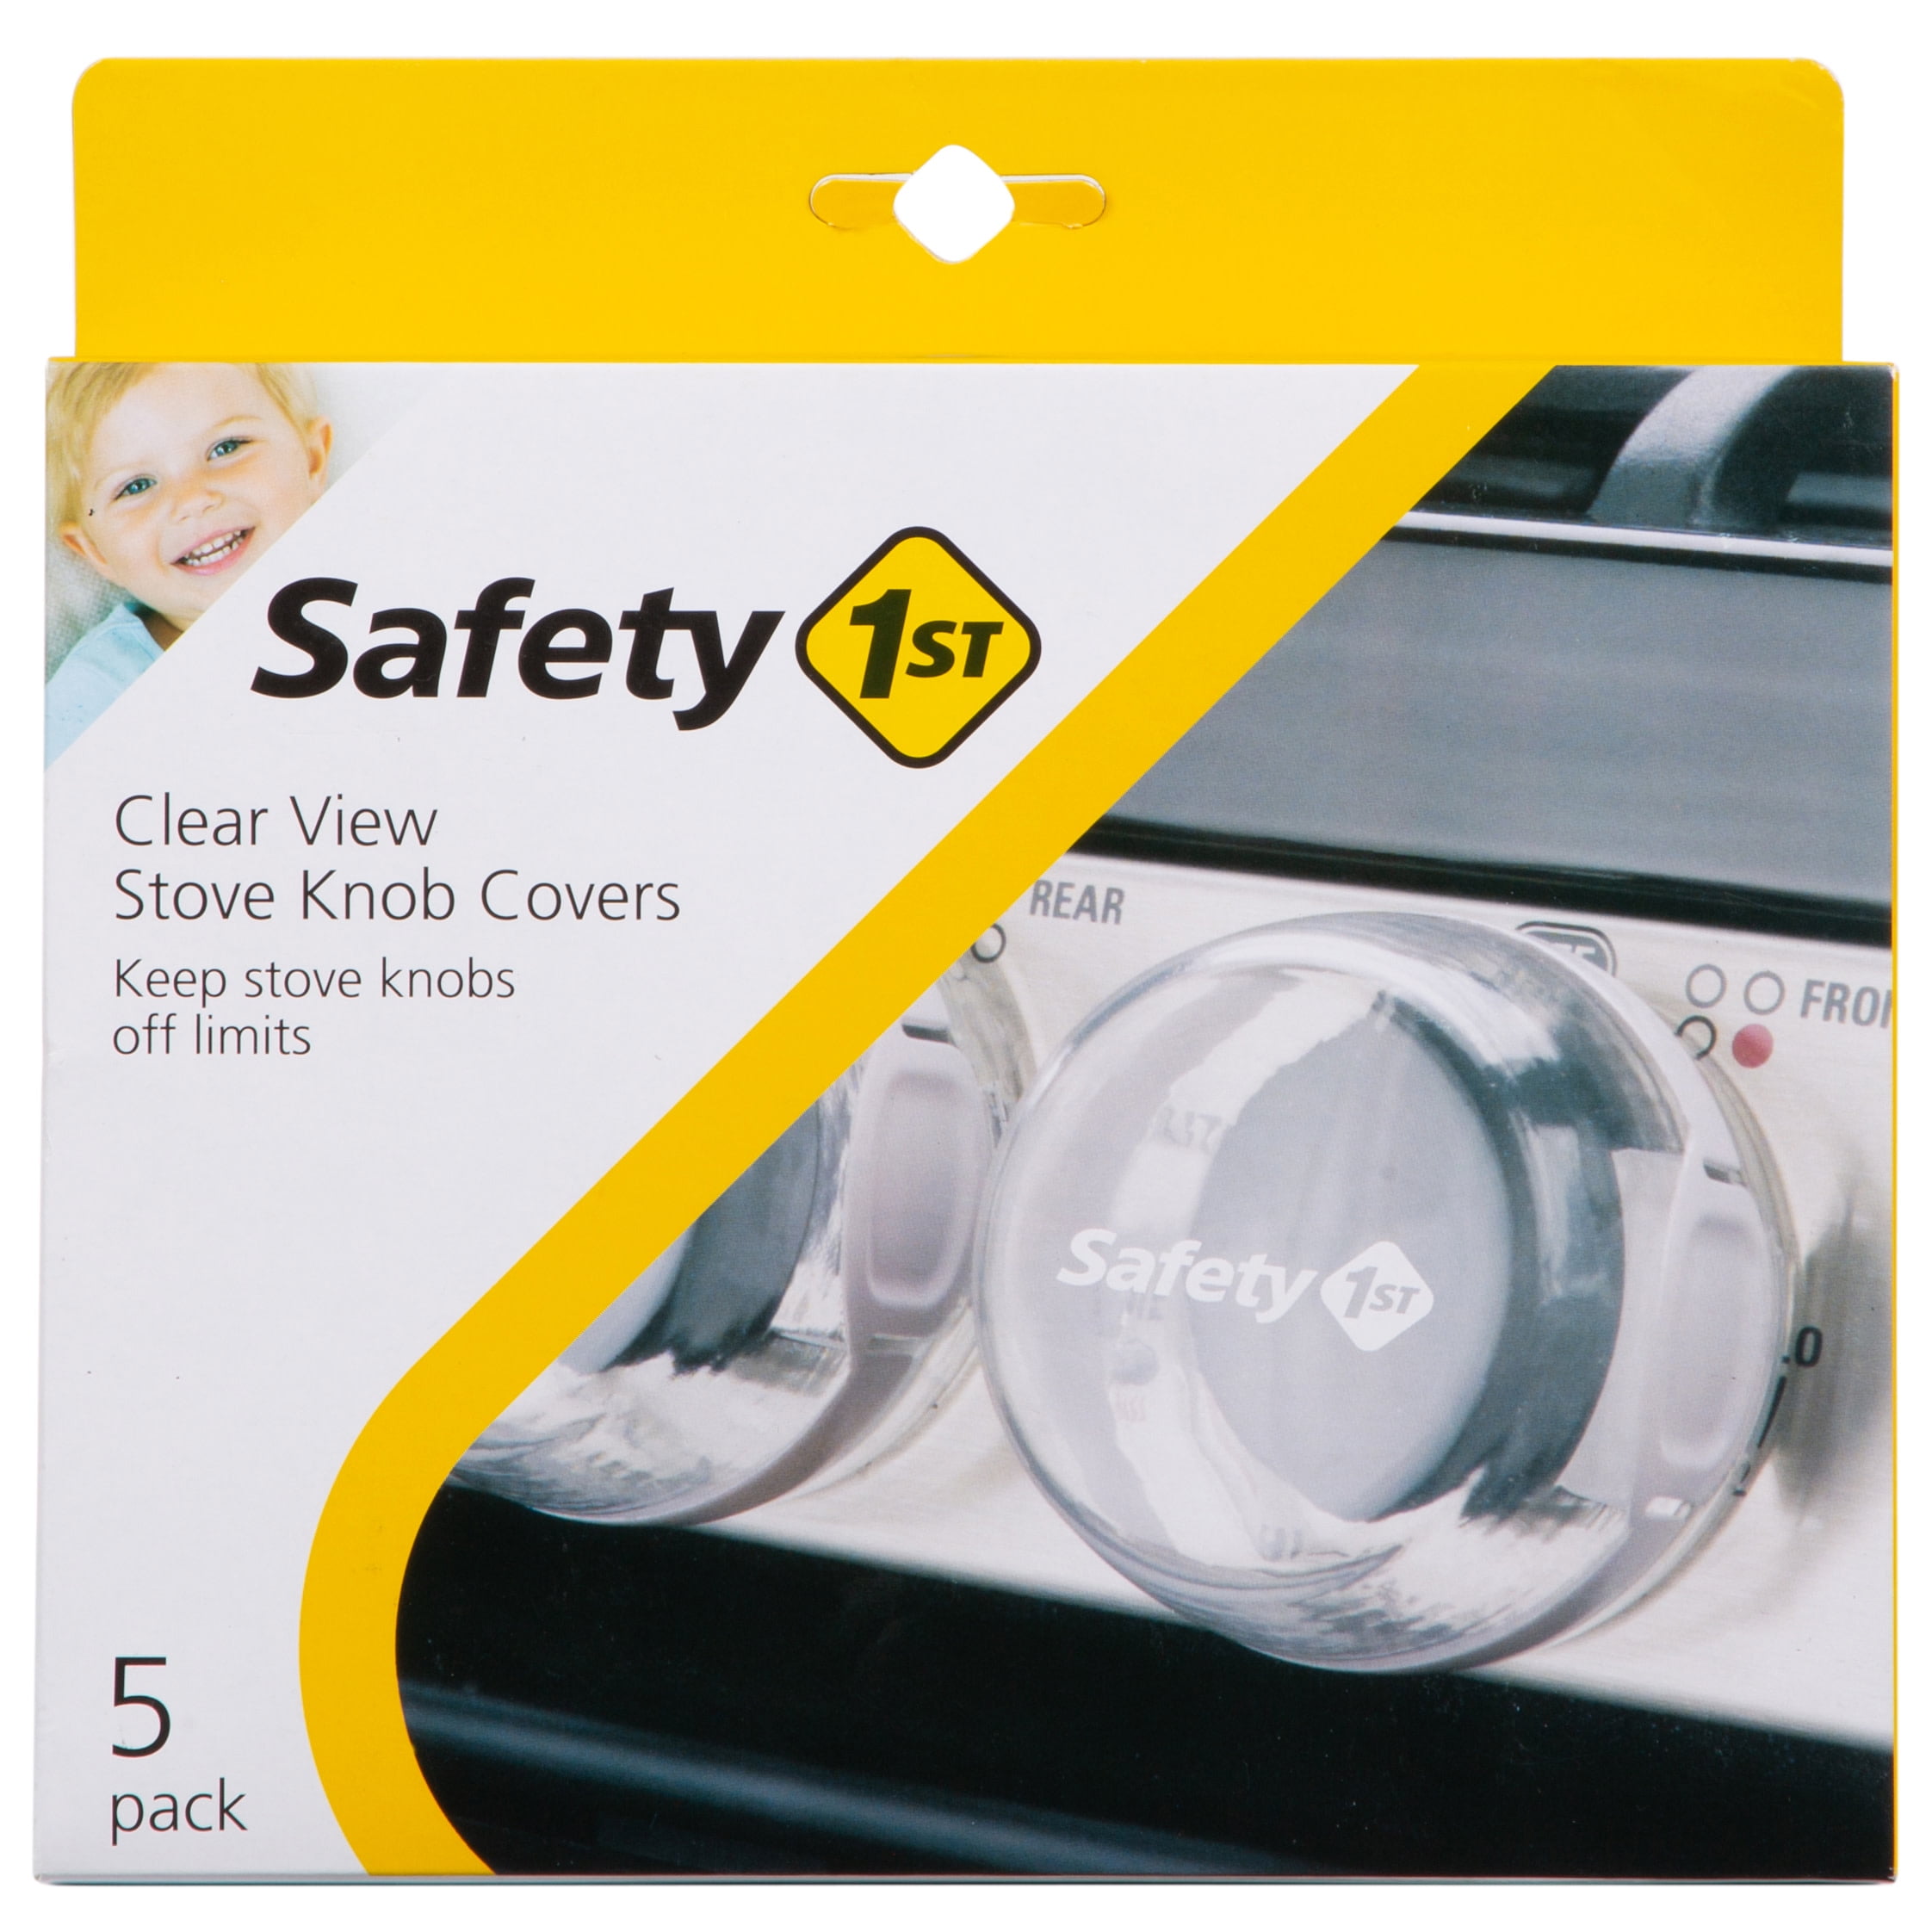 Aisikasi Kitchen Stove Knob Covers Baby Proof Clear View Oven Stove Knob Covers for Child Safety Set of 4 